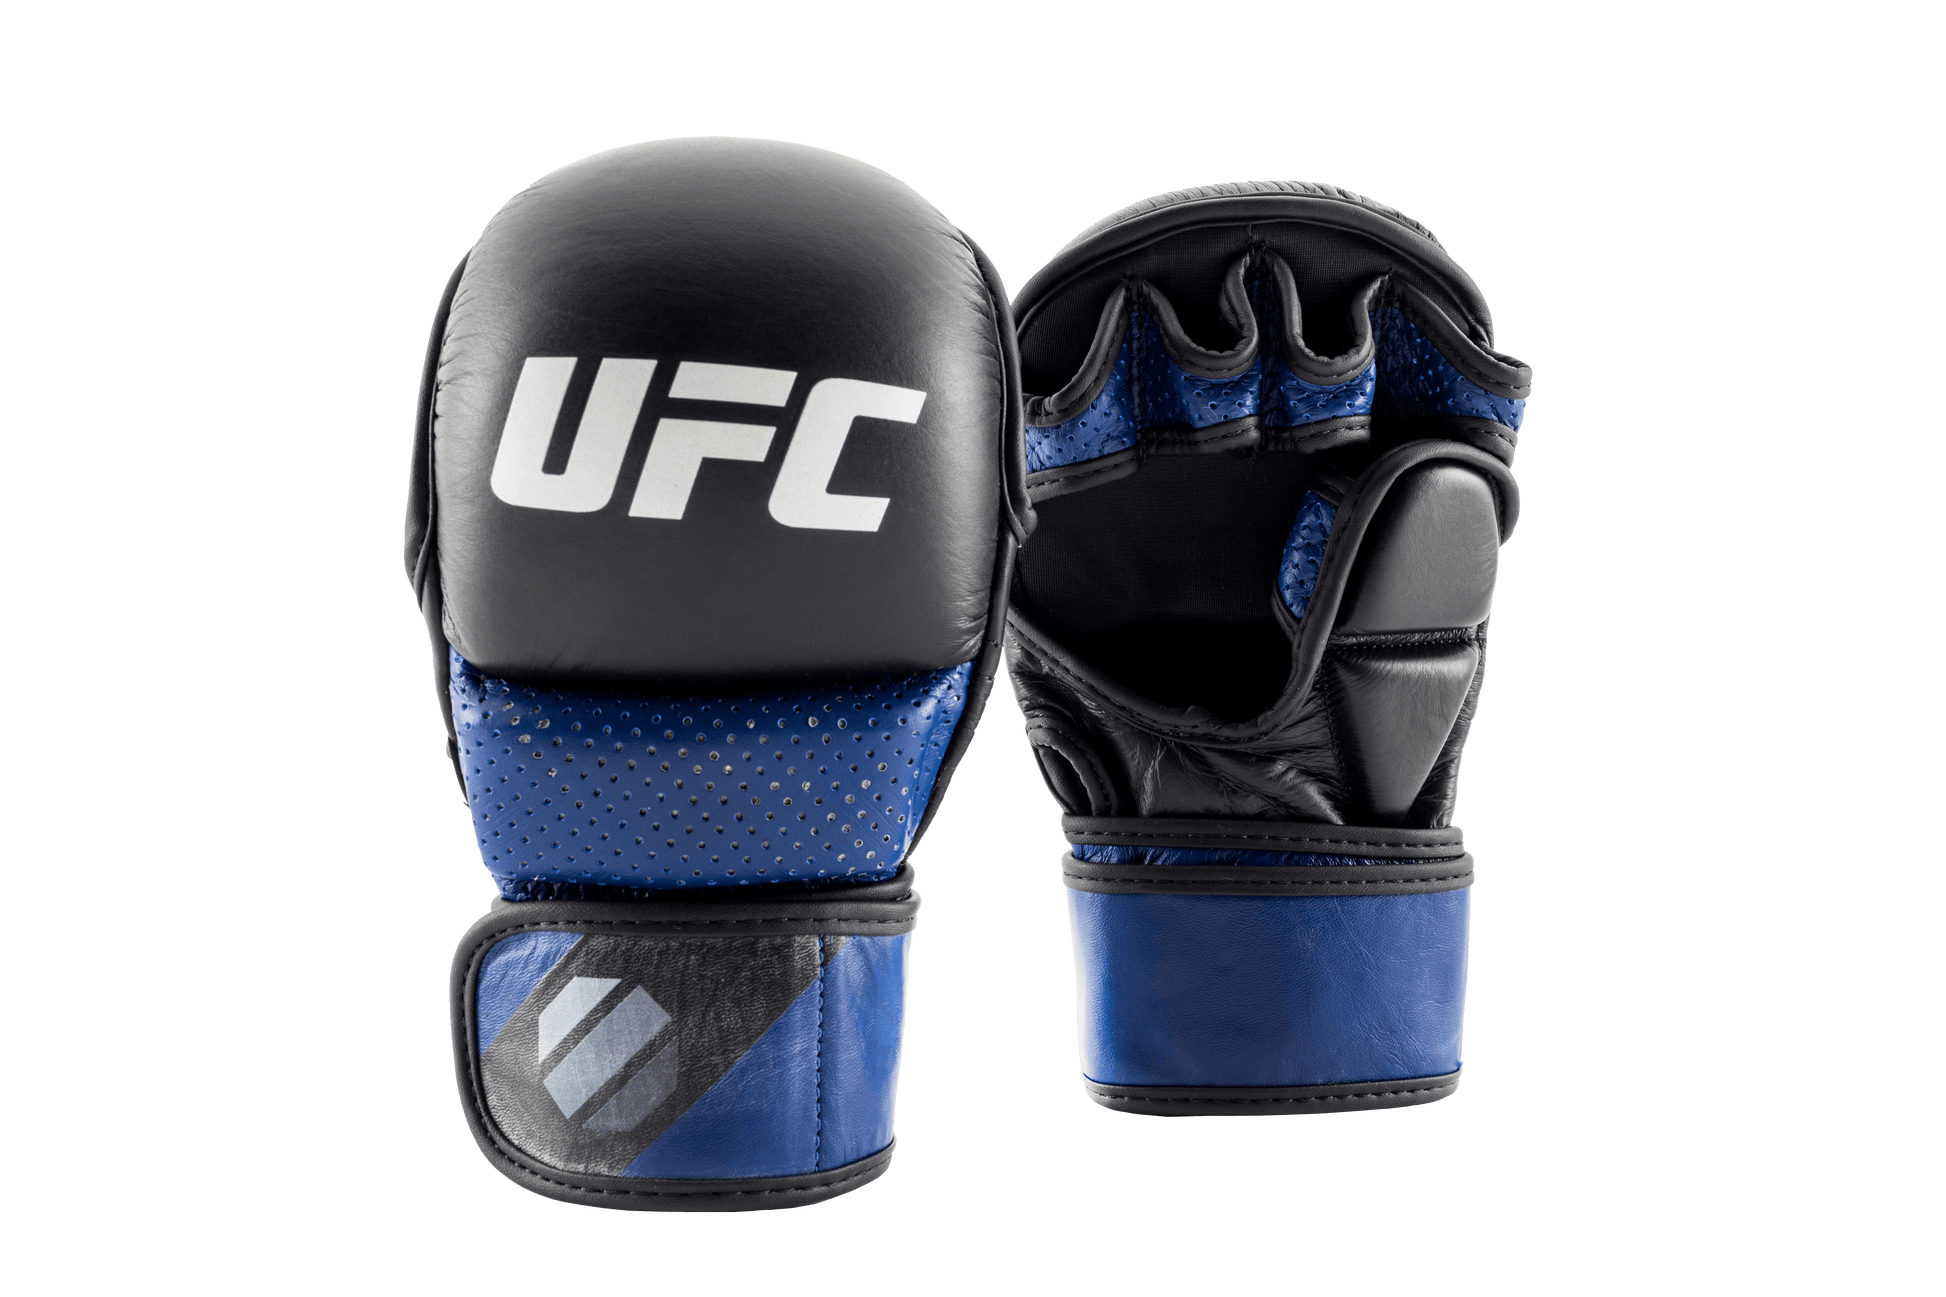 UFC PRO MMA Safety Sparring Gloves - UFC Equipment MMA and Boxing Gear Spirit Combat Sports